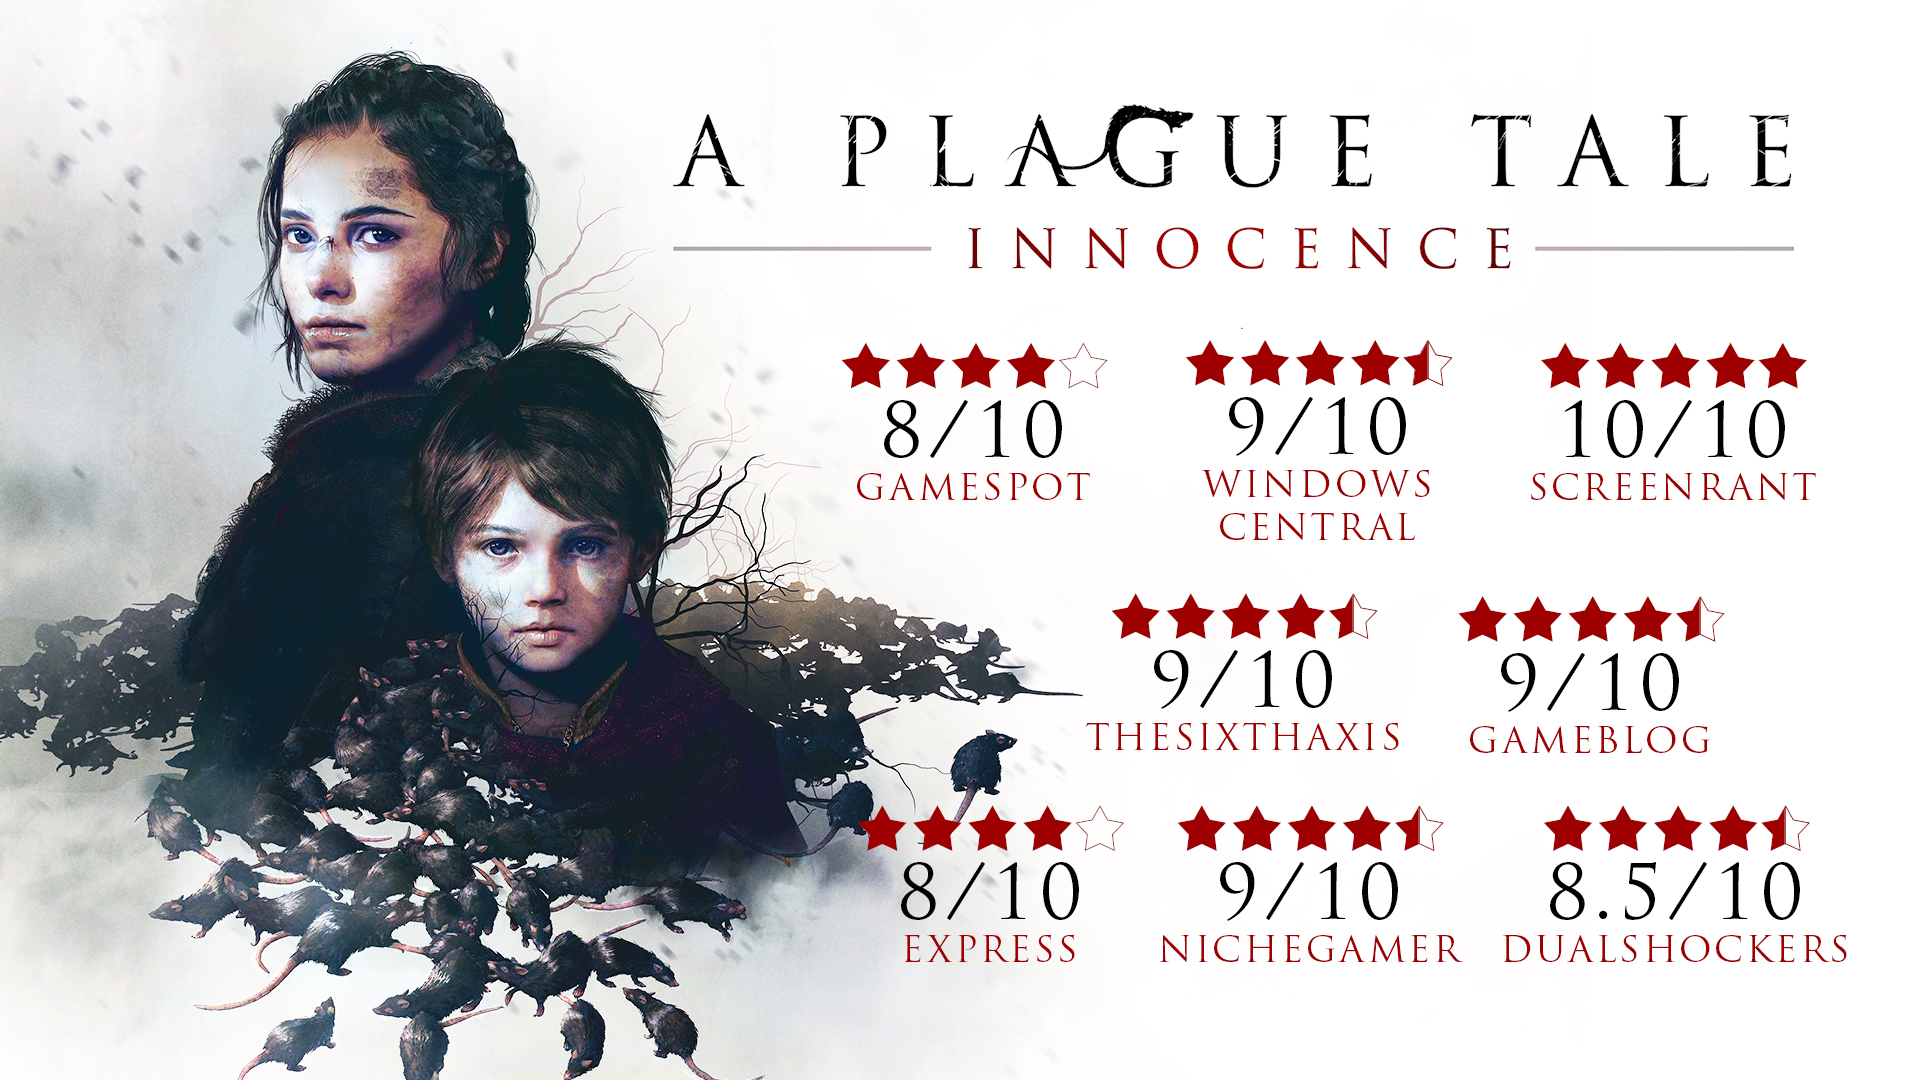 Find the best laptops for A Plague Tale: Innocence